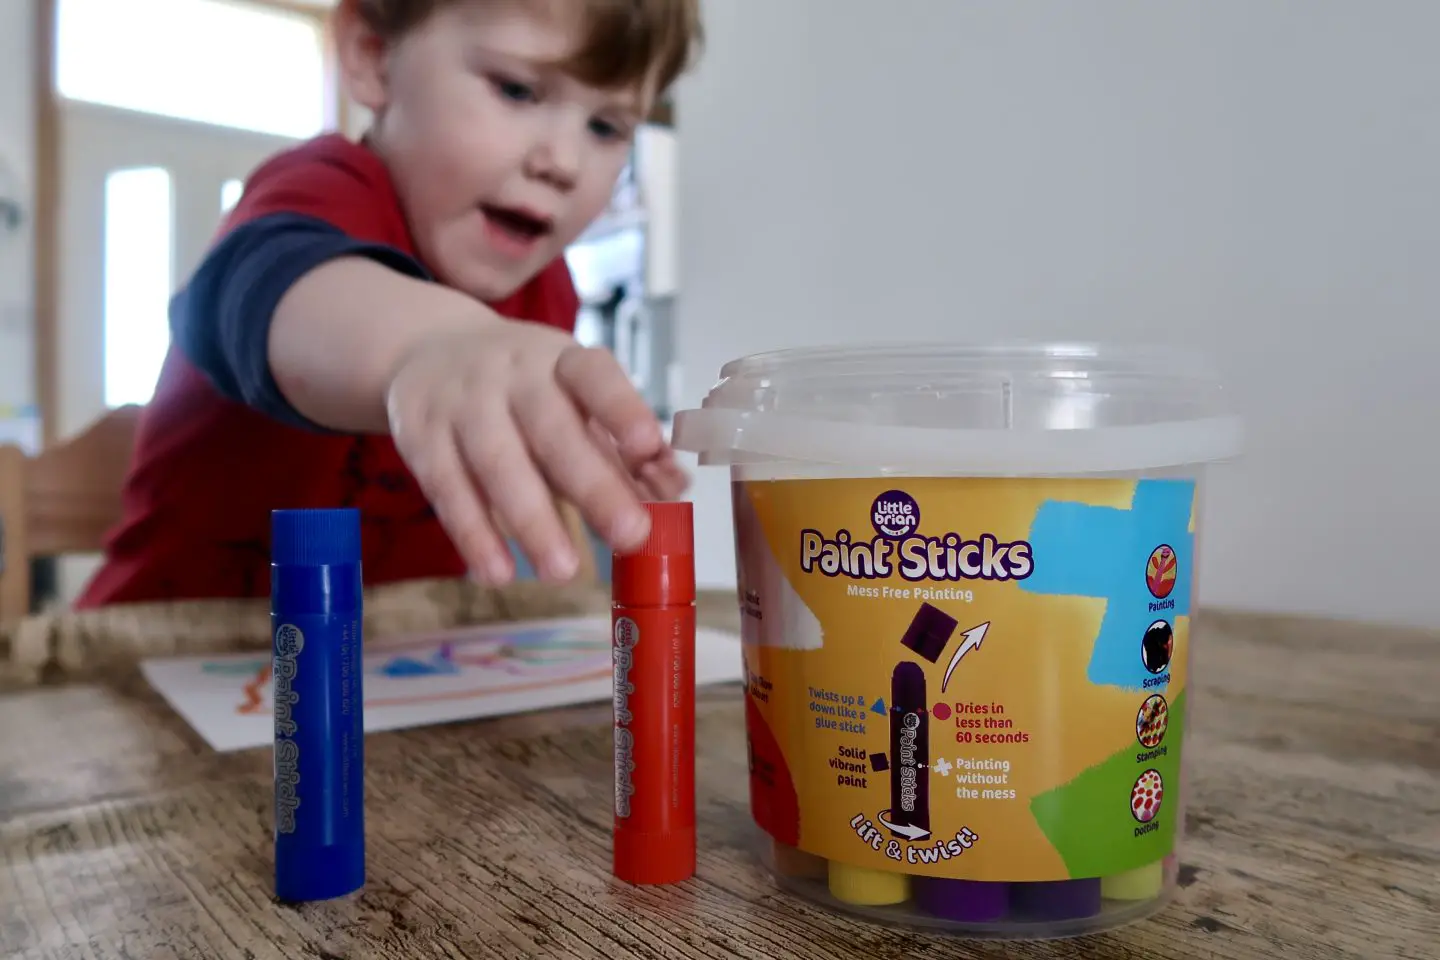 A bucket of Little Brian Paint Sticks, with a child reaching forwards to grab a paint stick